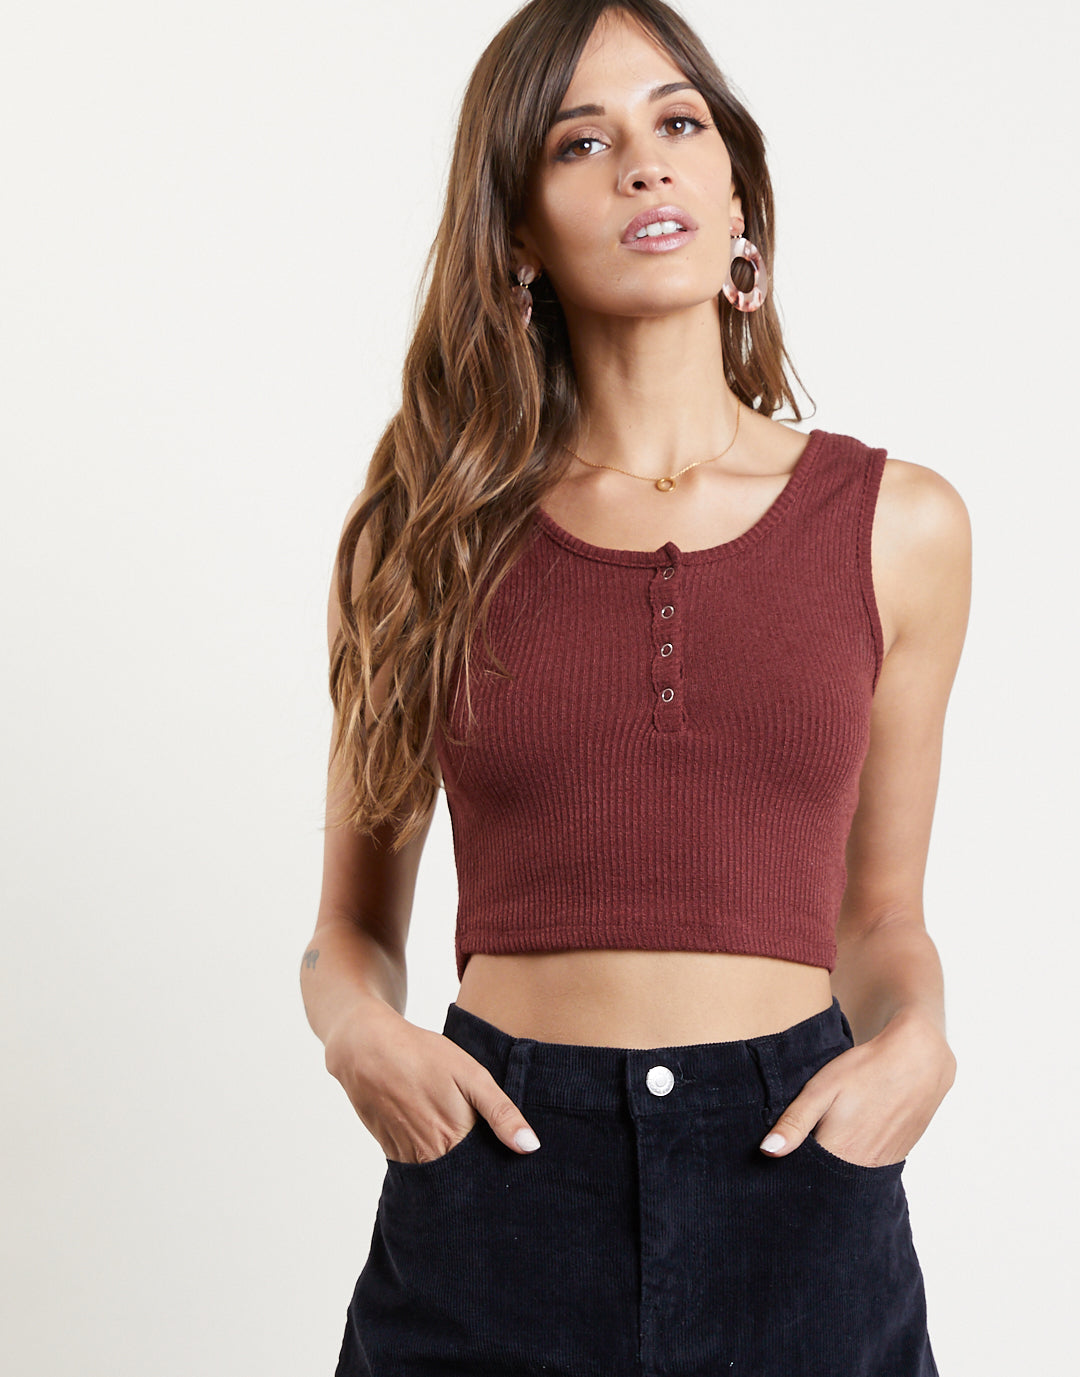 Carry On Cropped Tank Tops Red/Brown Small -2020AVE